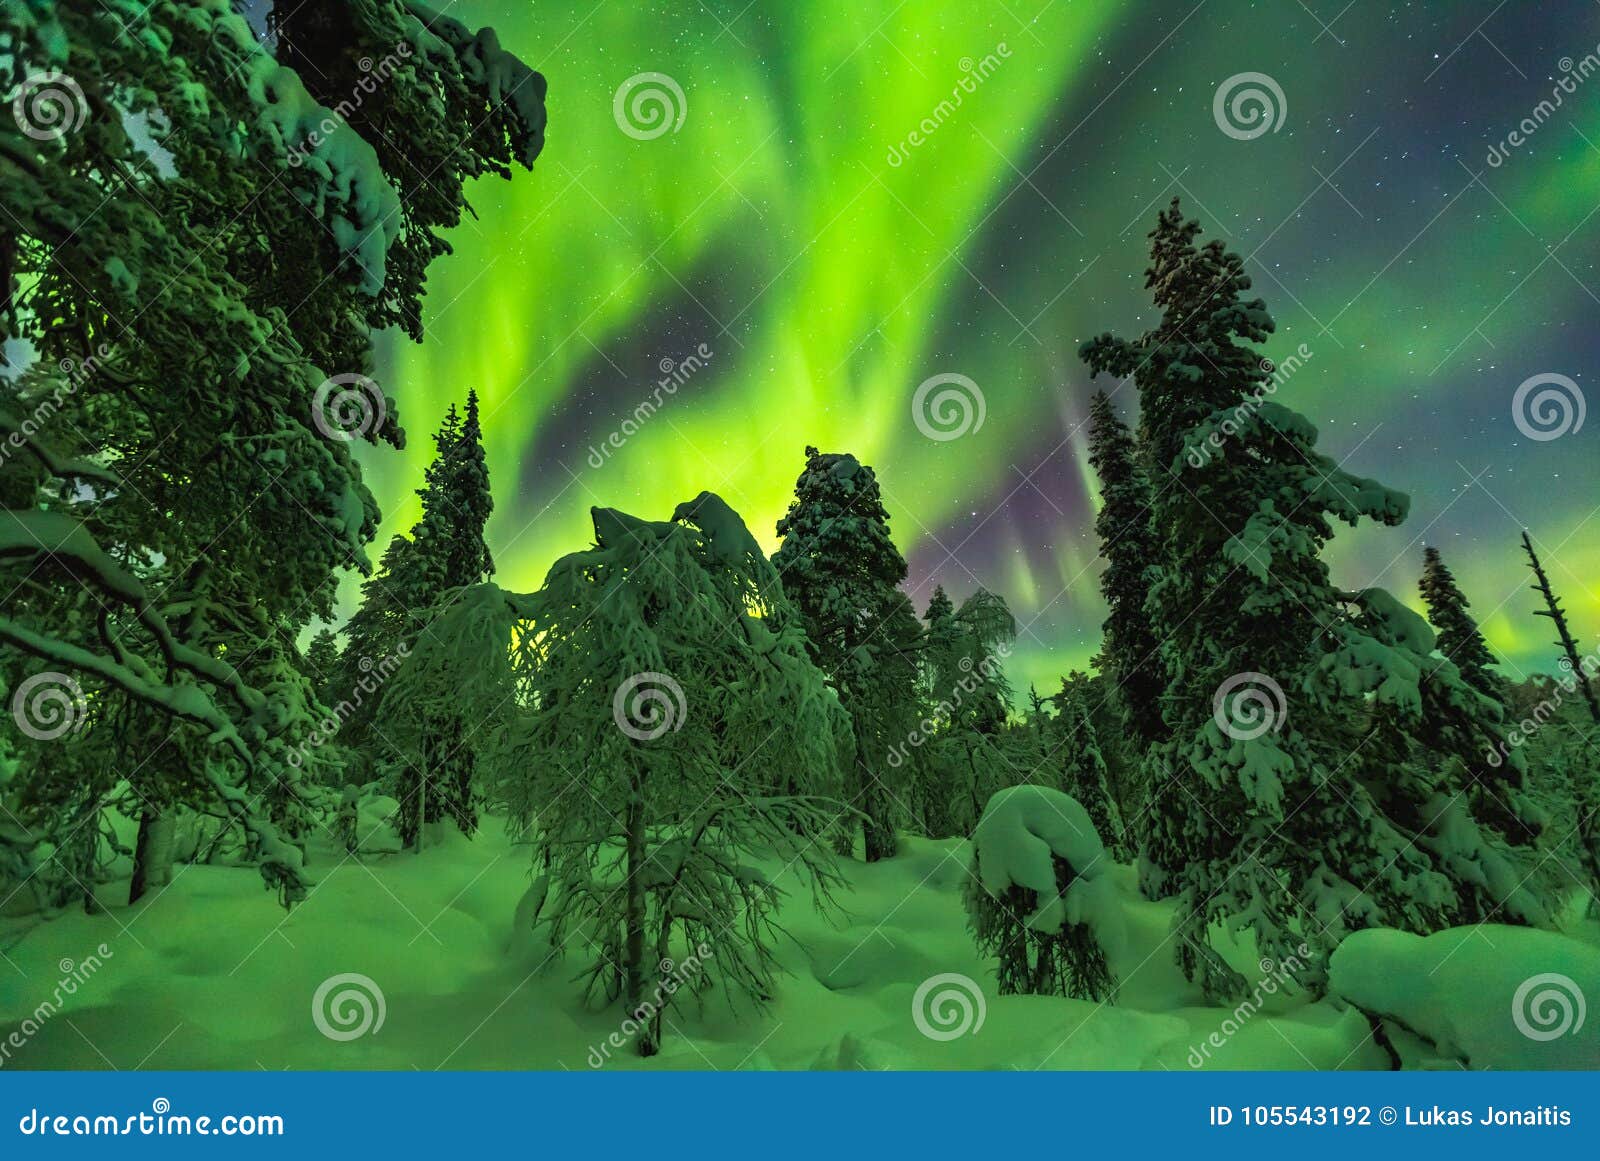 northern lights in finish lapland